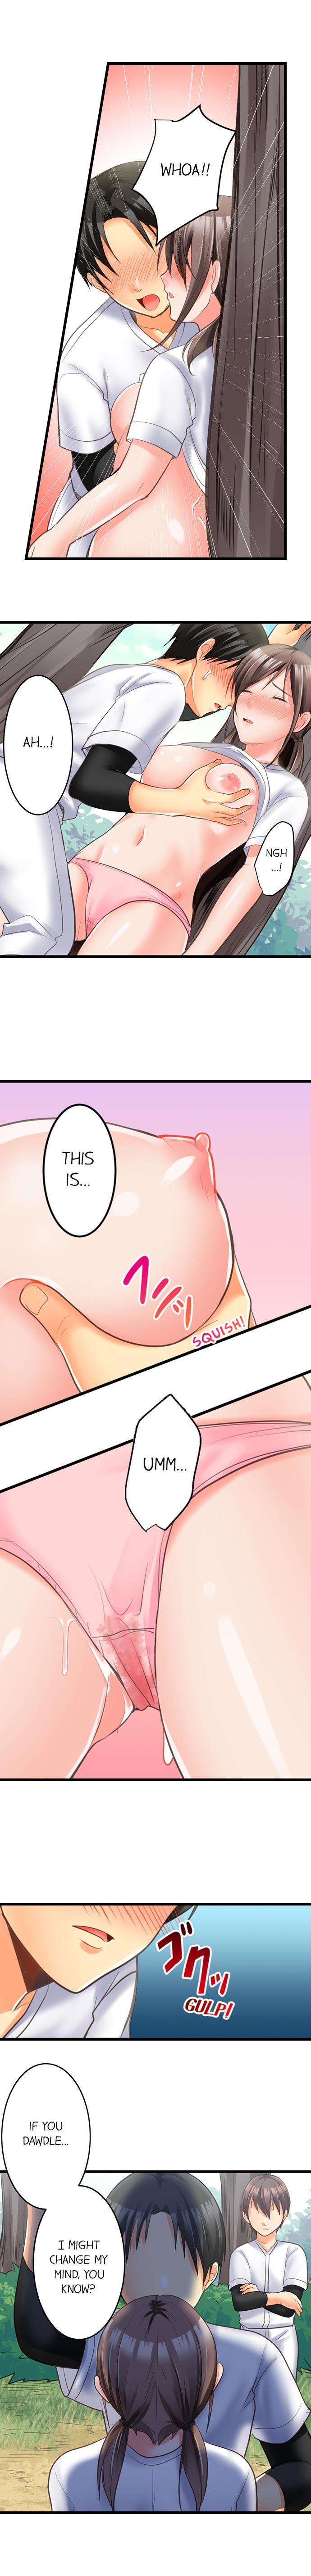 The Day She Became a Sex Toy (Complete] 66